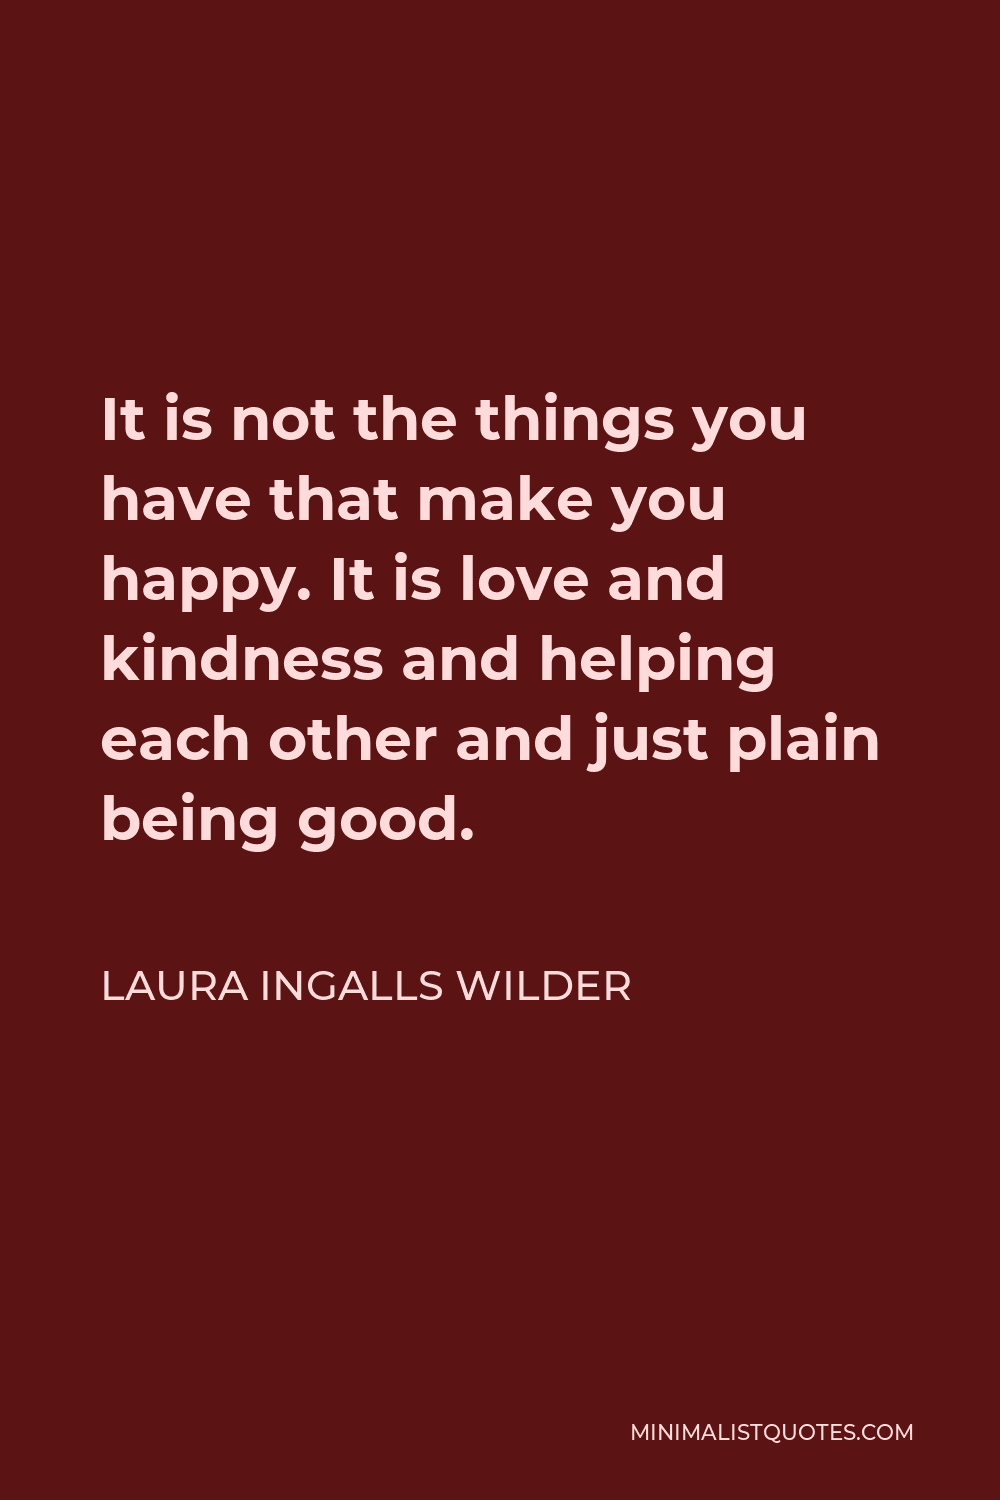 Laura Ingalls Wilder Quote - It is not the things you have that make you happy. It is love and kindness and helping each other and just plain being good.